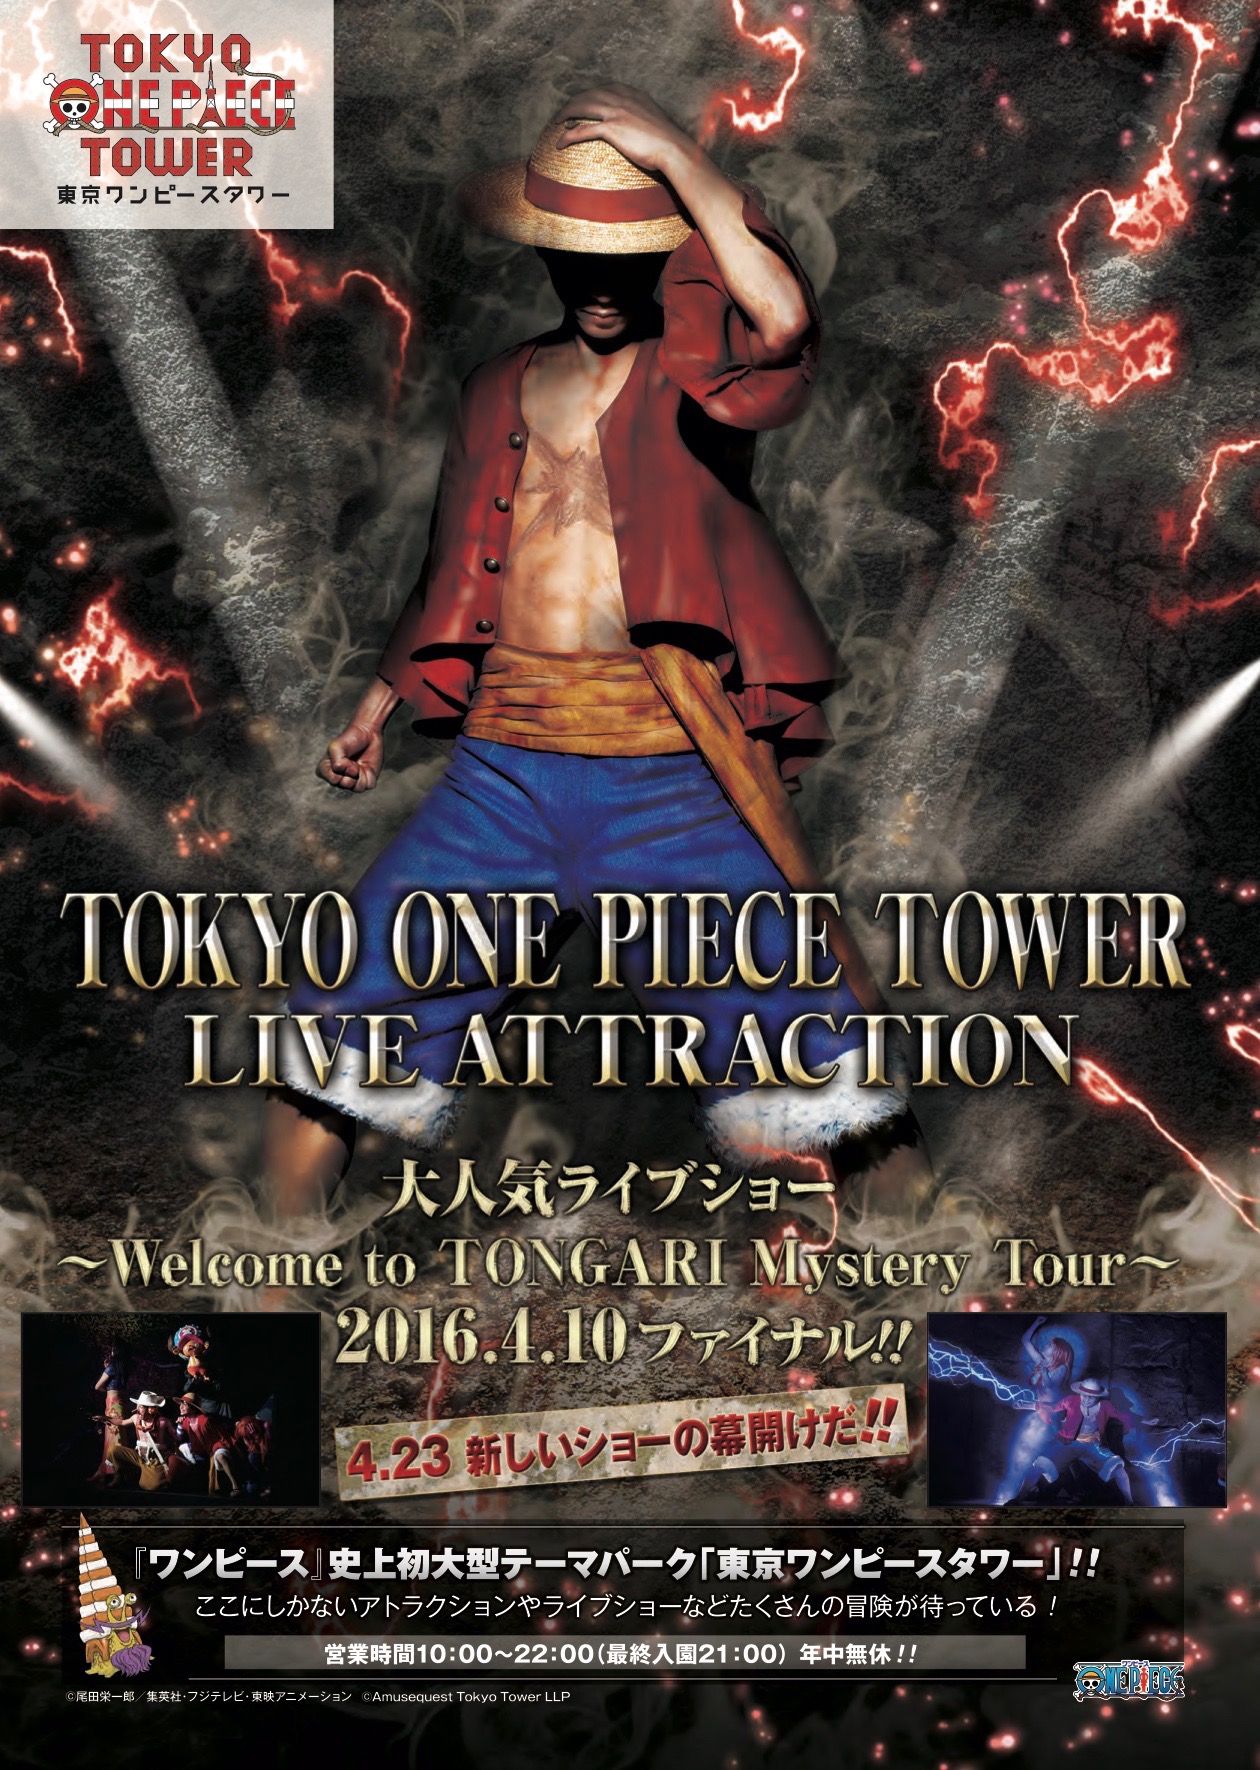 Farewell Event For One Piece Show At Tokyo Tower Japan Today